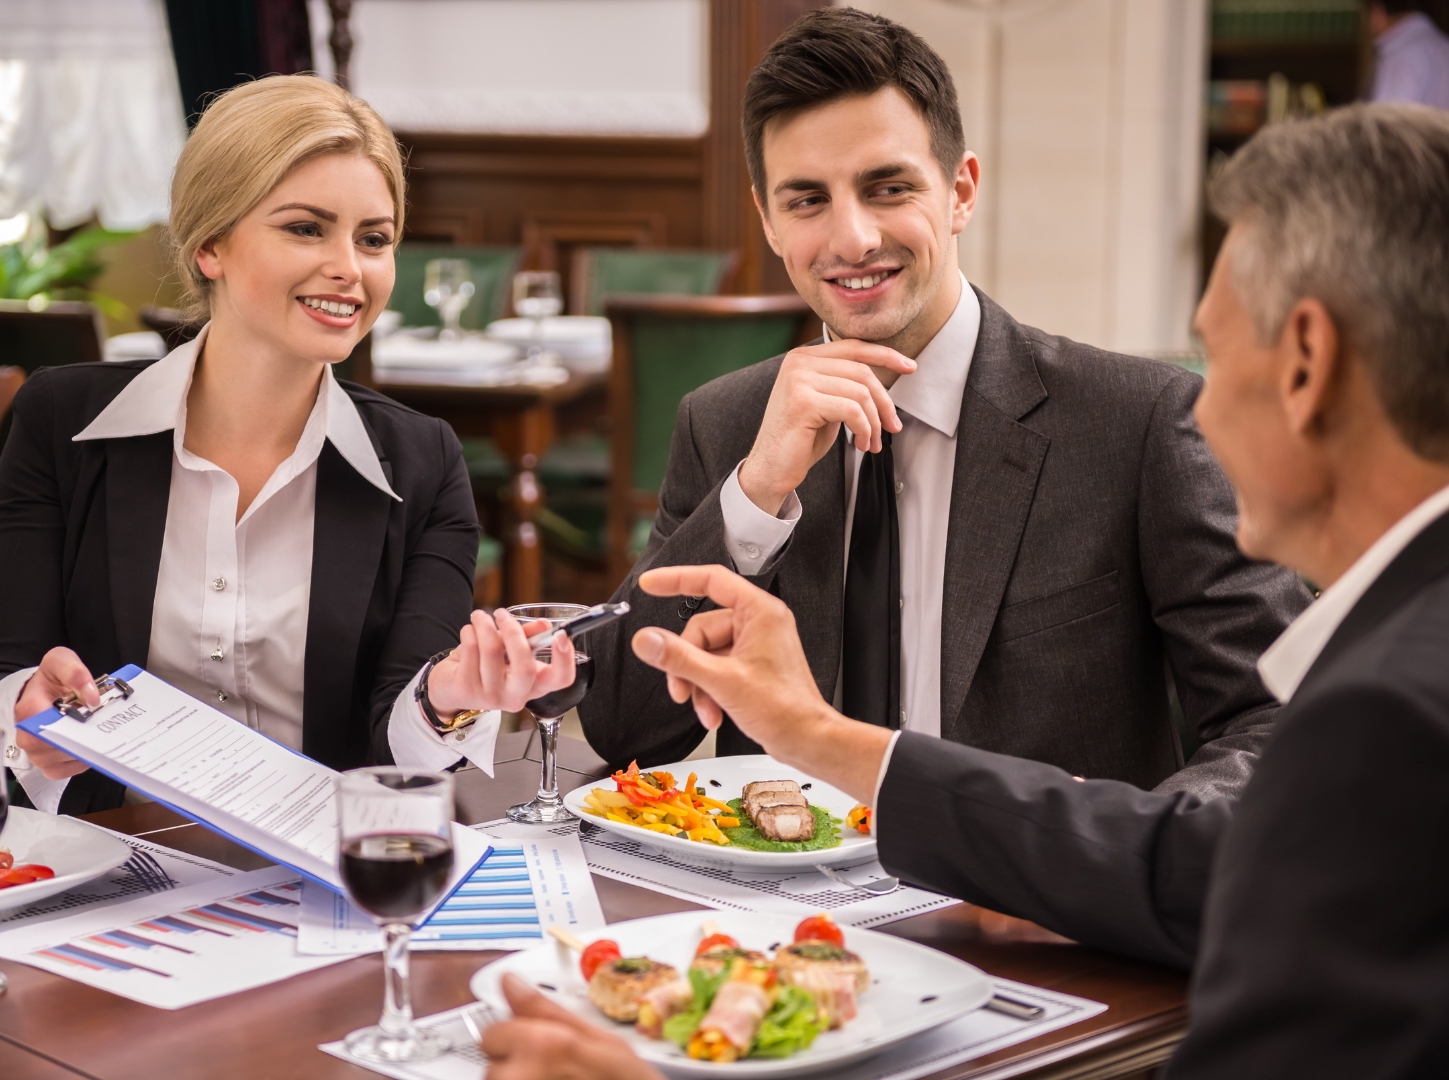 one-business-female-and-two-business-males-discuss-together-about-restaurant-business-plan